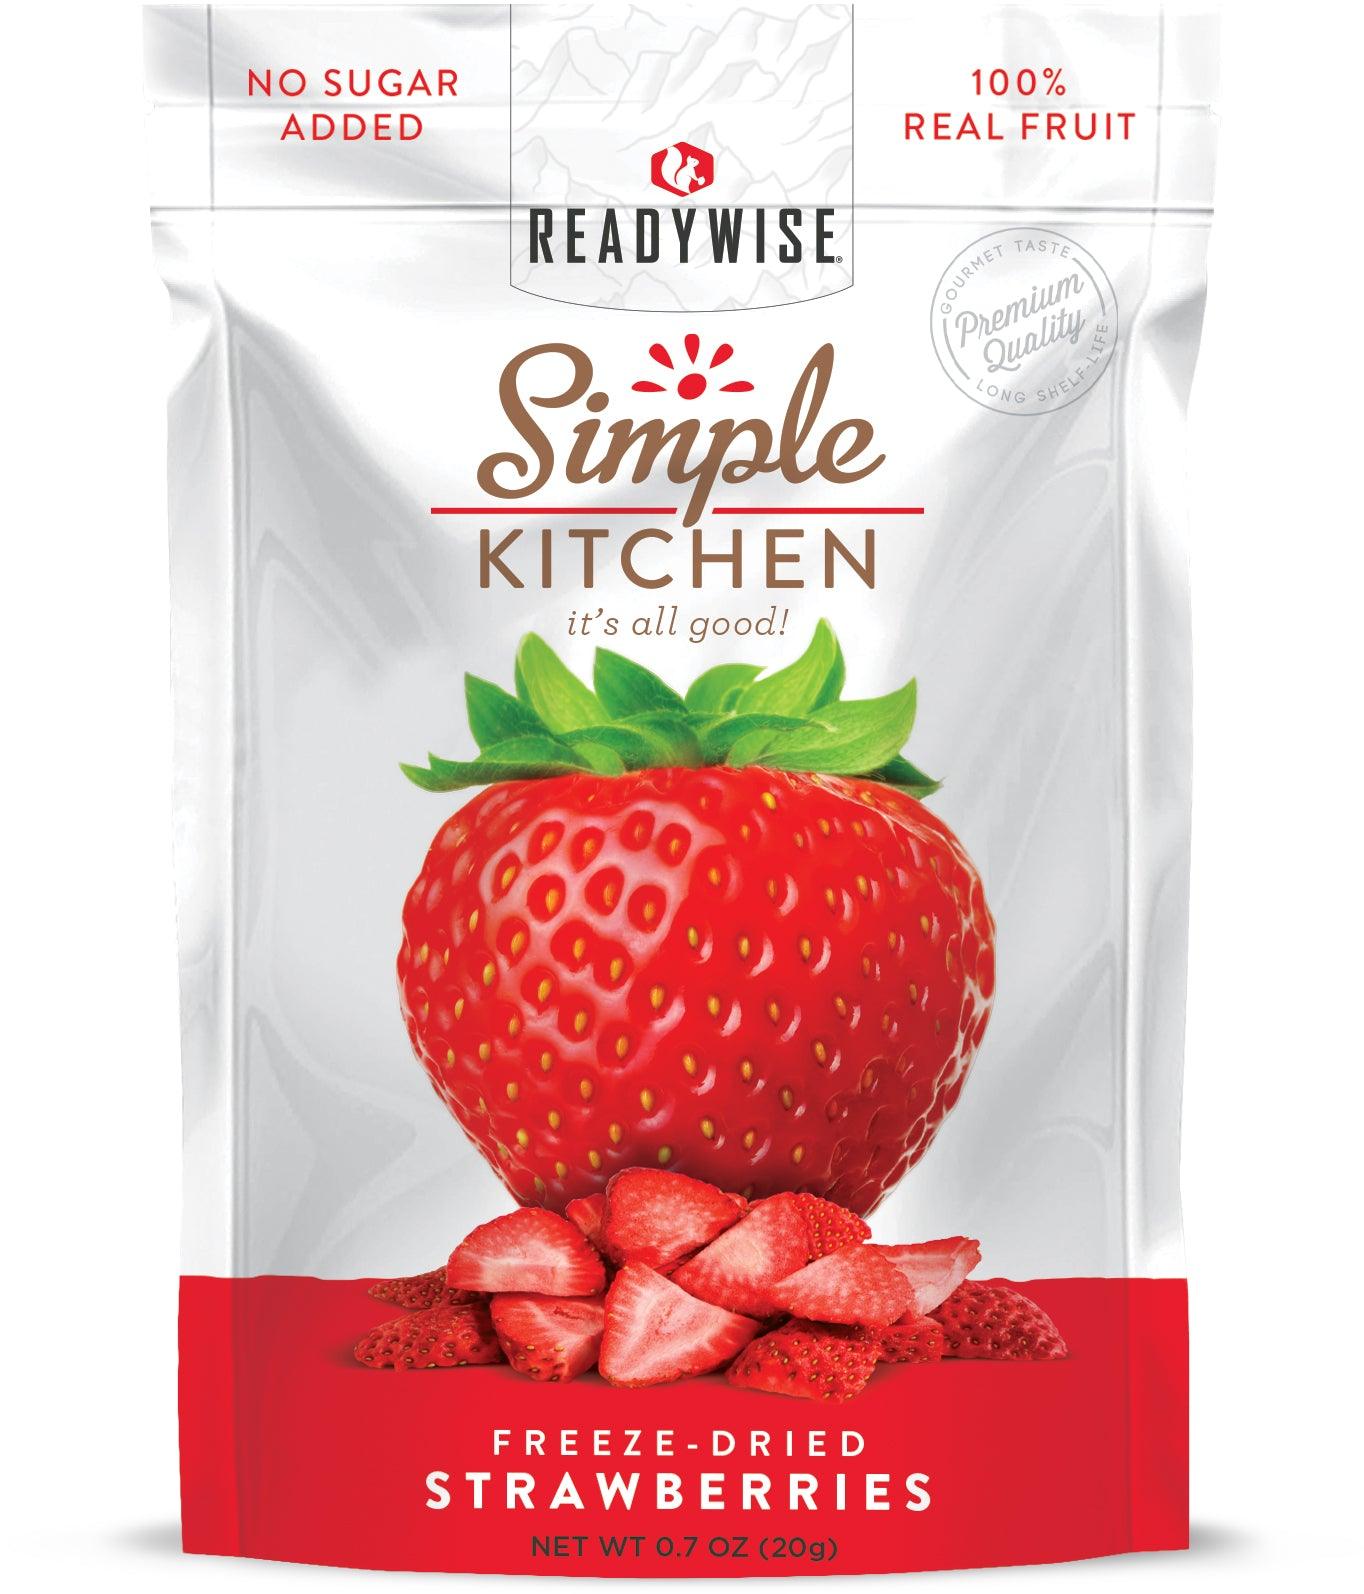 Healthy-snack-delicious-freeze-dried-strawberries-SimpleKitchen